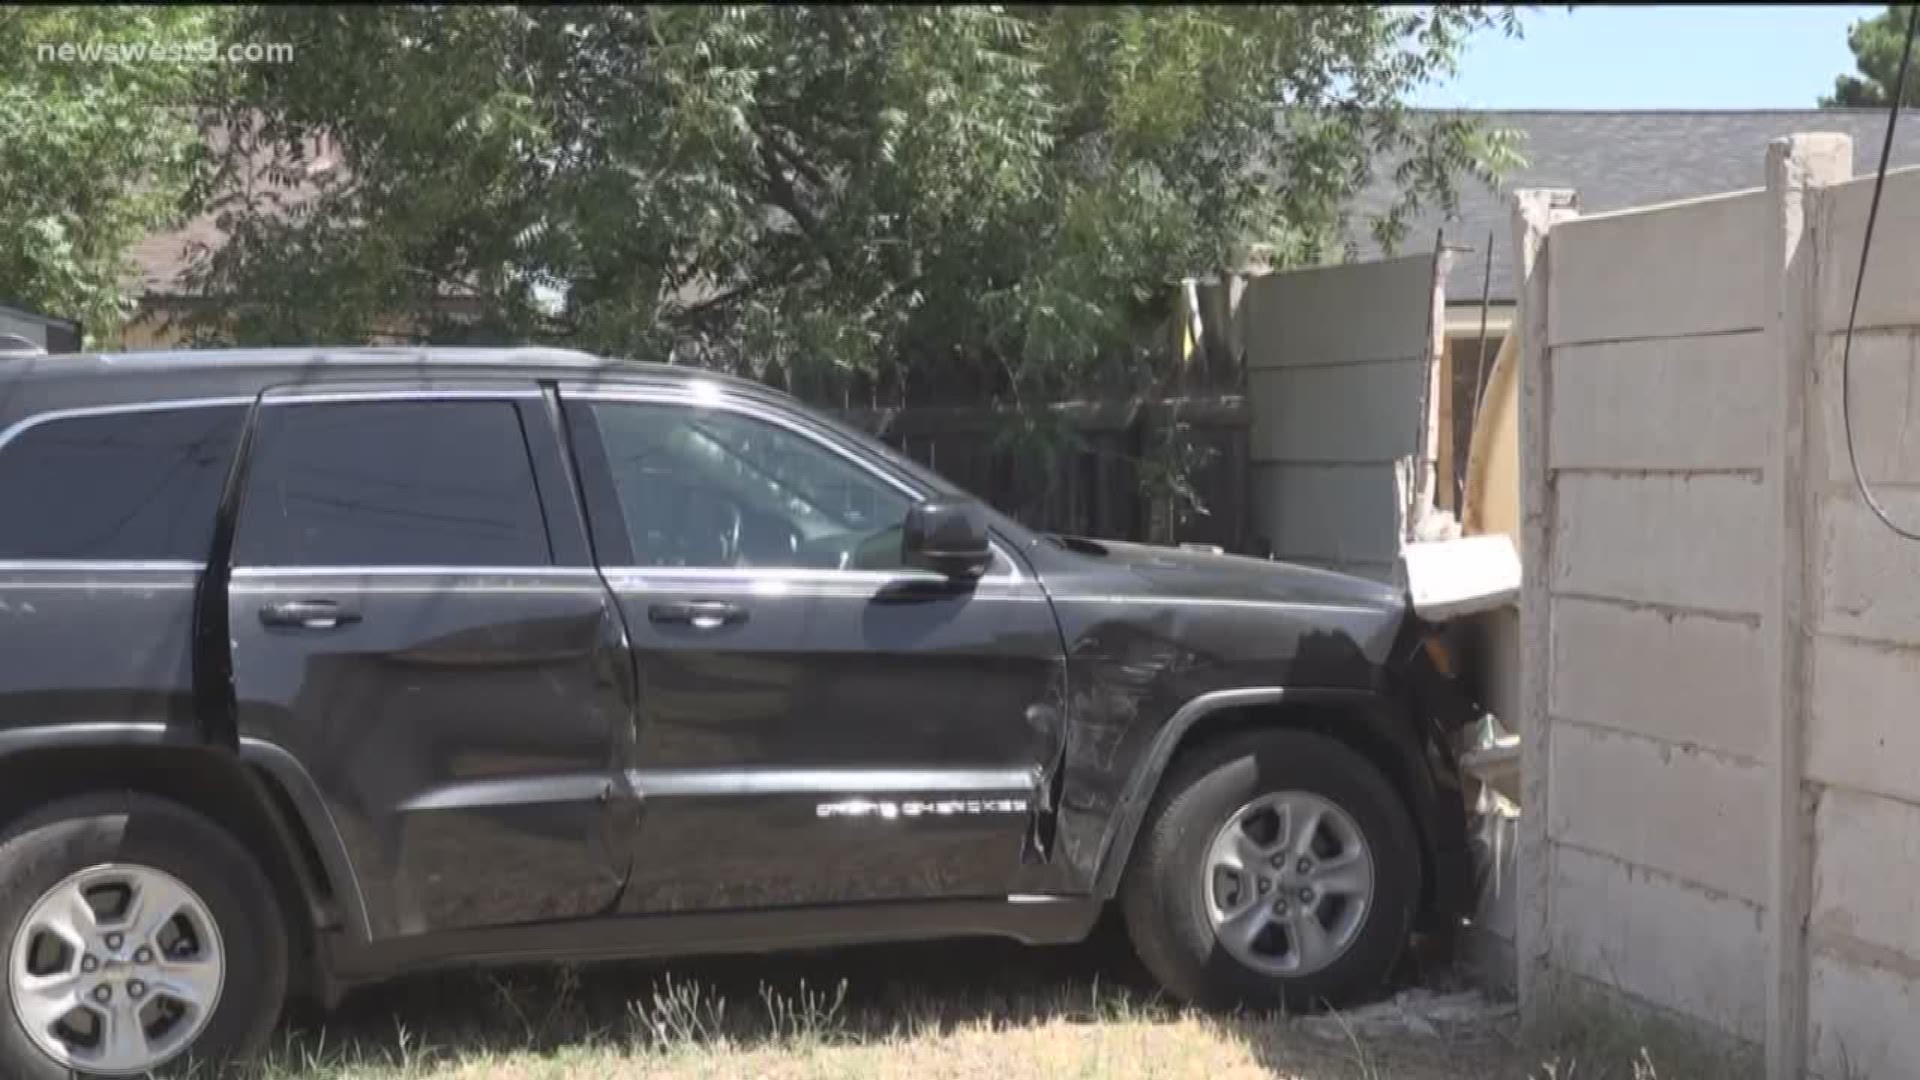 The Jeep SUV was parked in the victim's garage when two teens snuck in and stole it. It was later found a few blocks away, totaled.